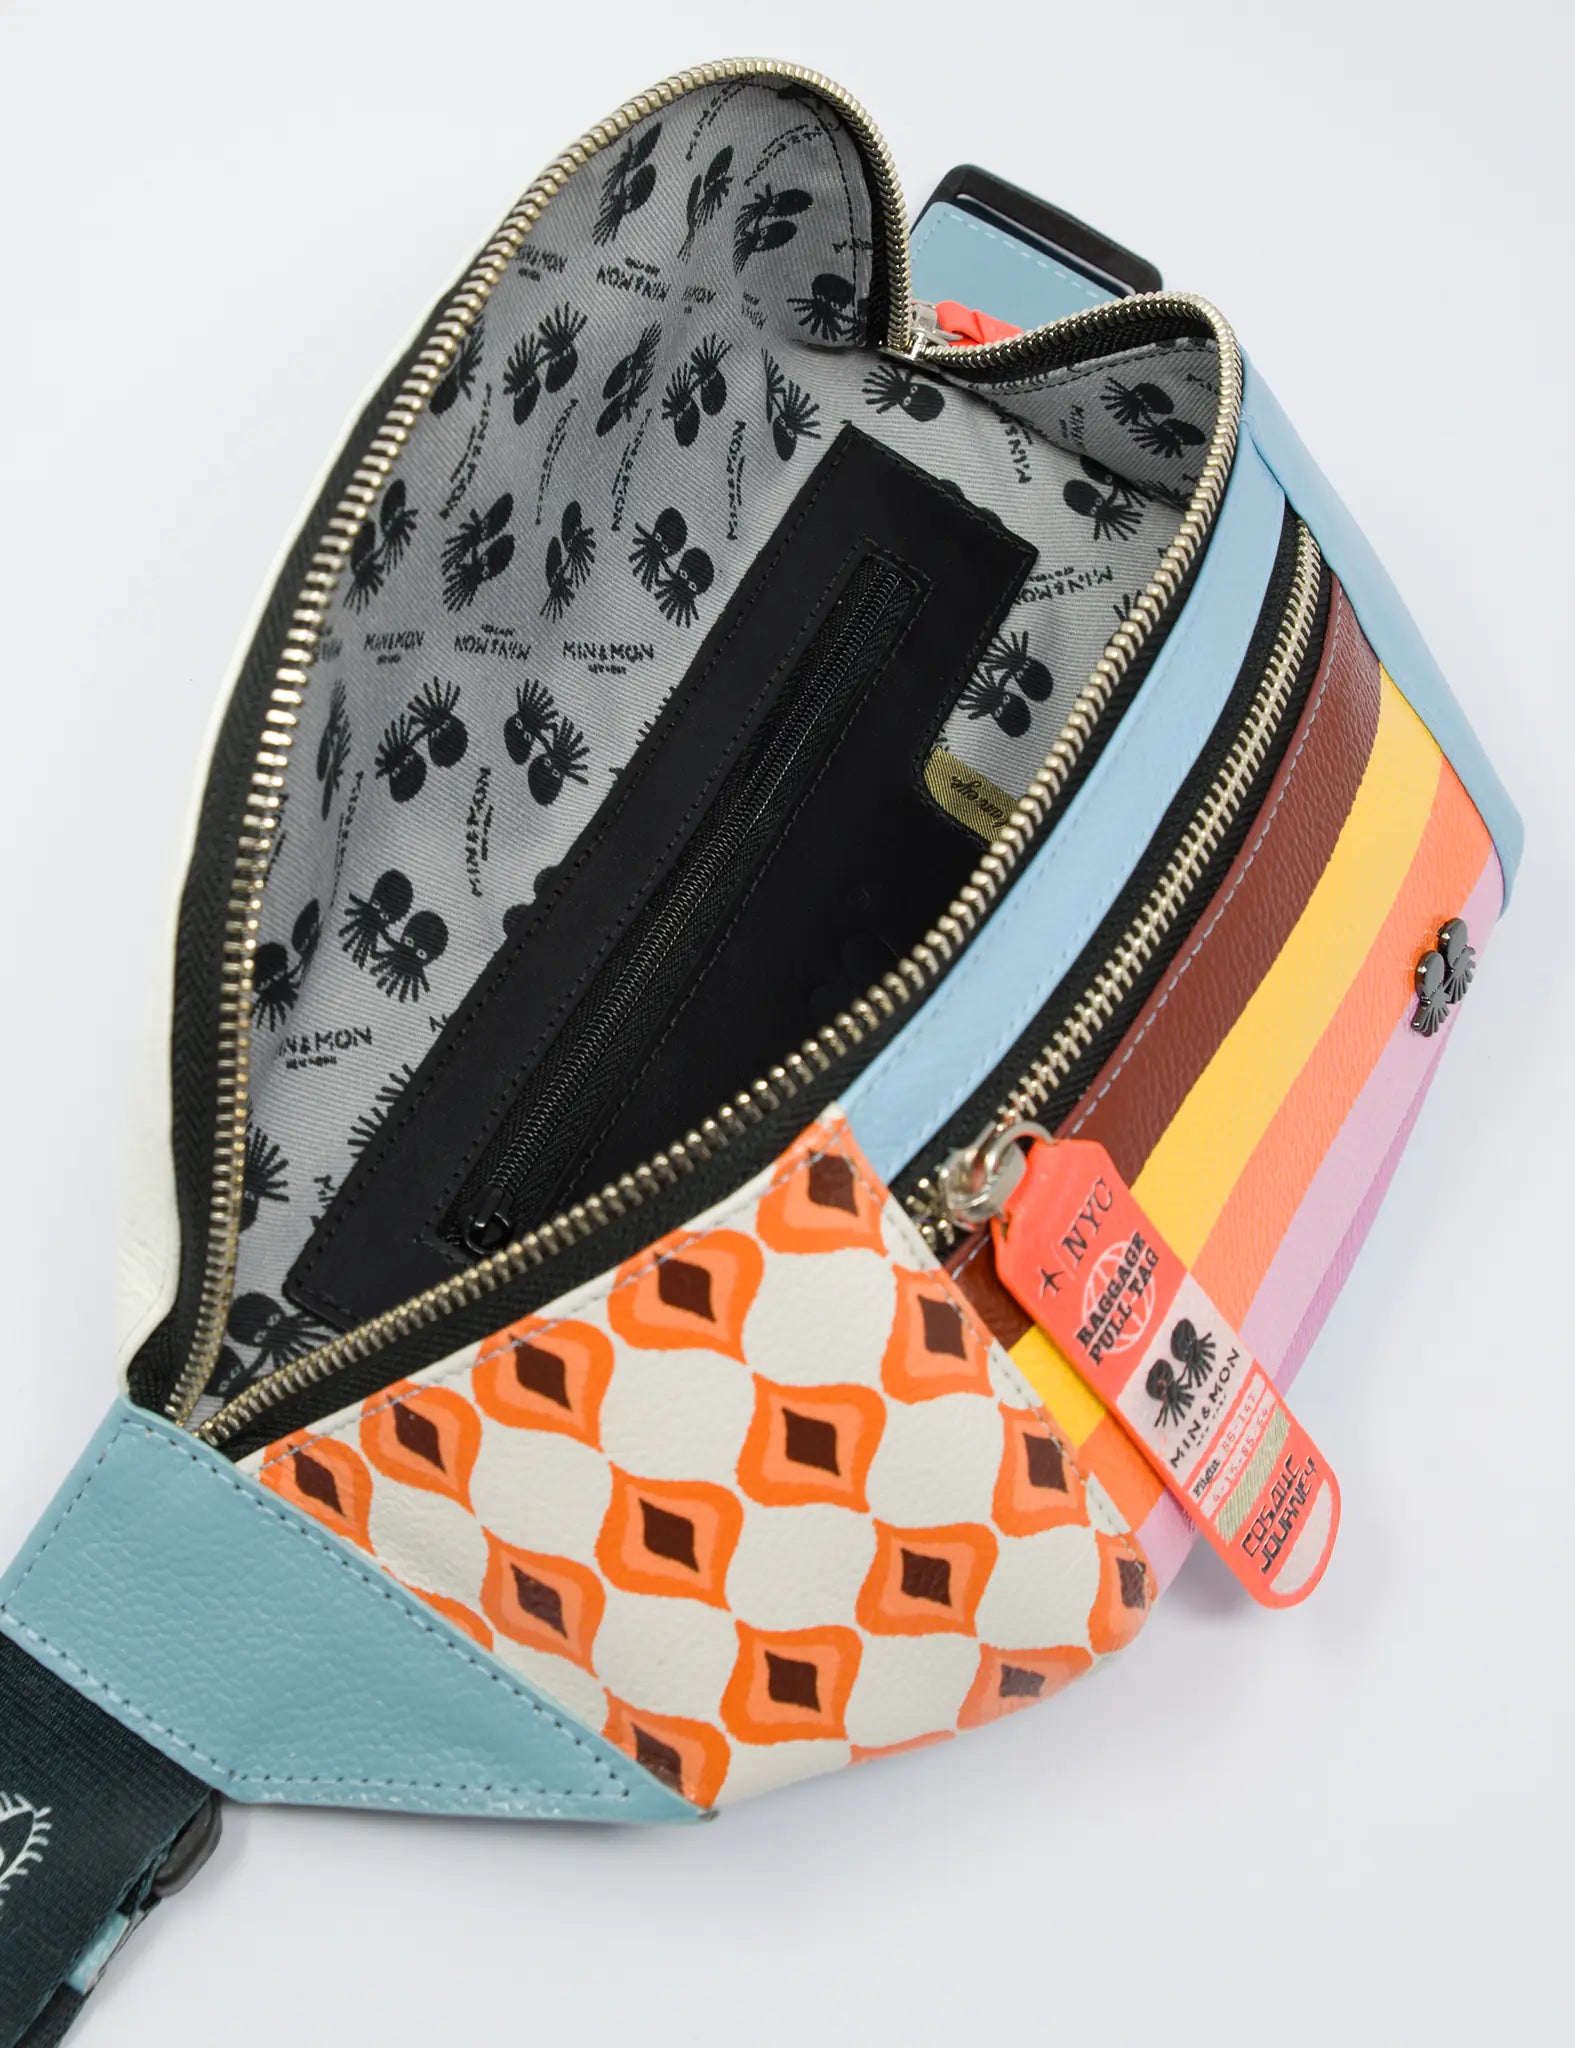 Bag Fanny Pack Cream And Blue Leather - Eyes Pattern Debossed - Side